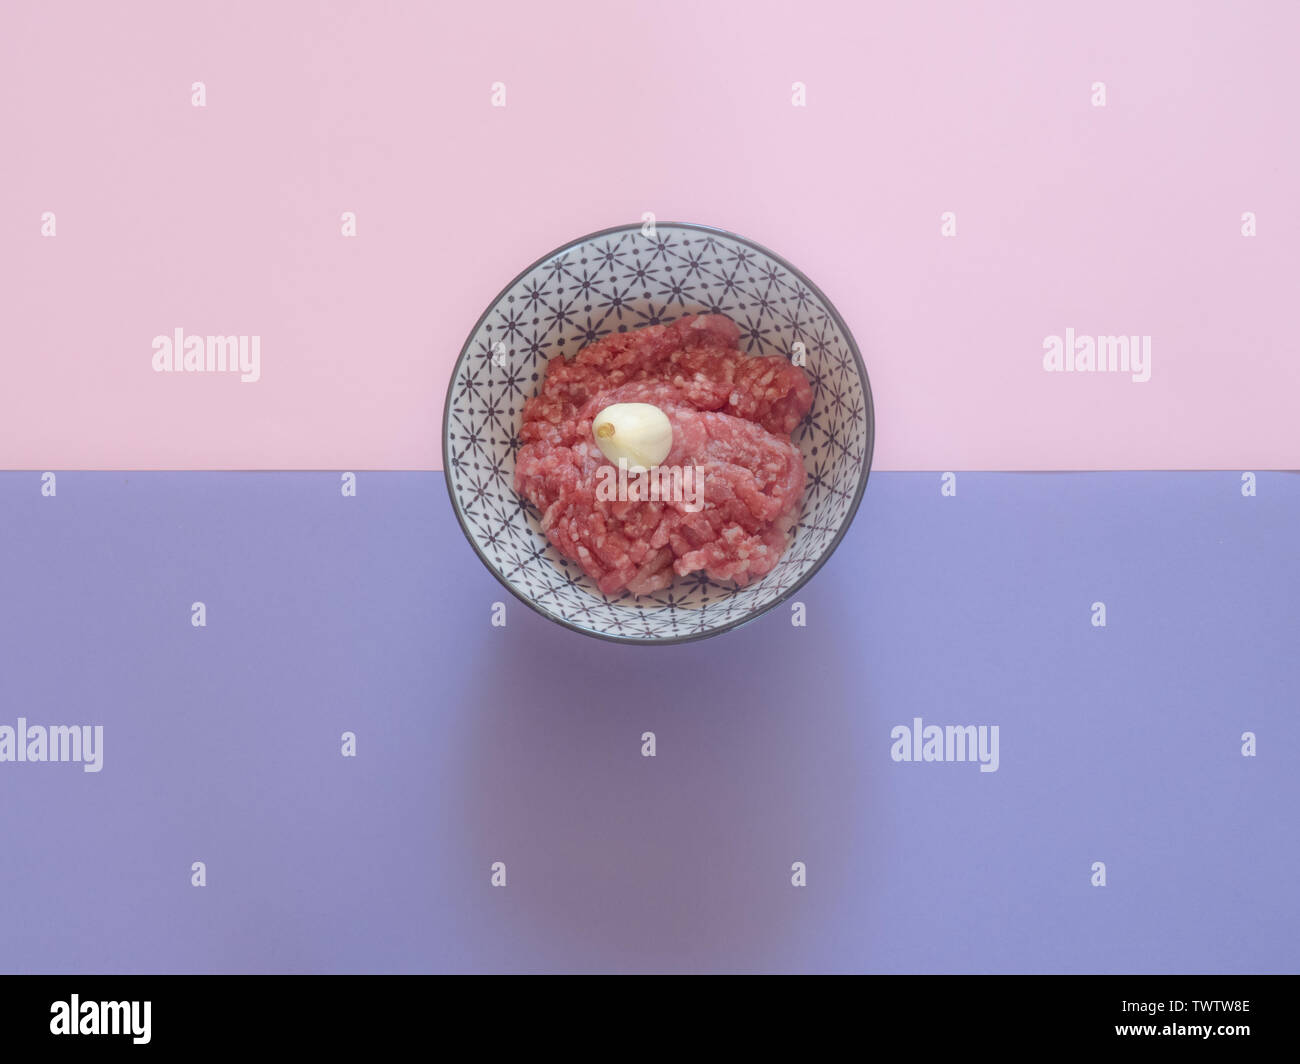 Minced beef meat in a bowl on pink and purple background Stock Photo